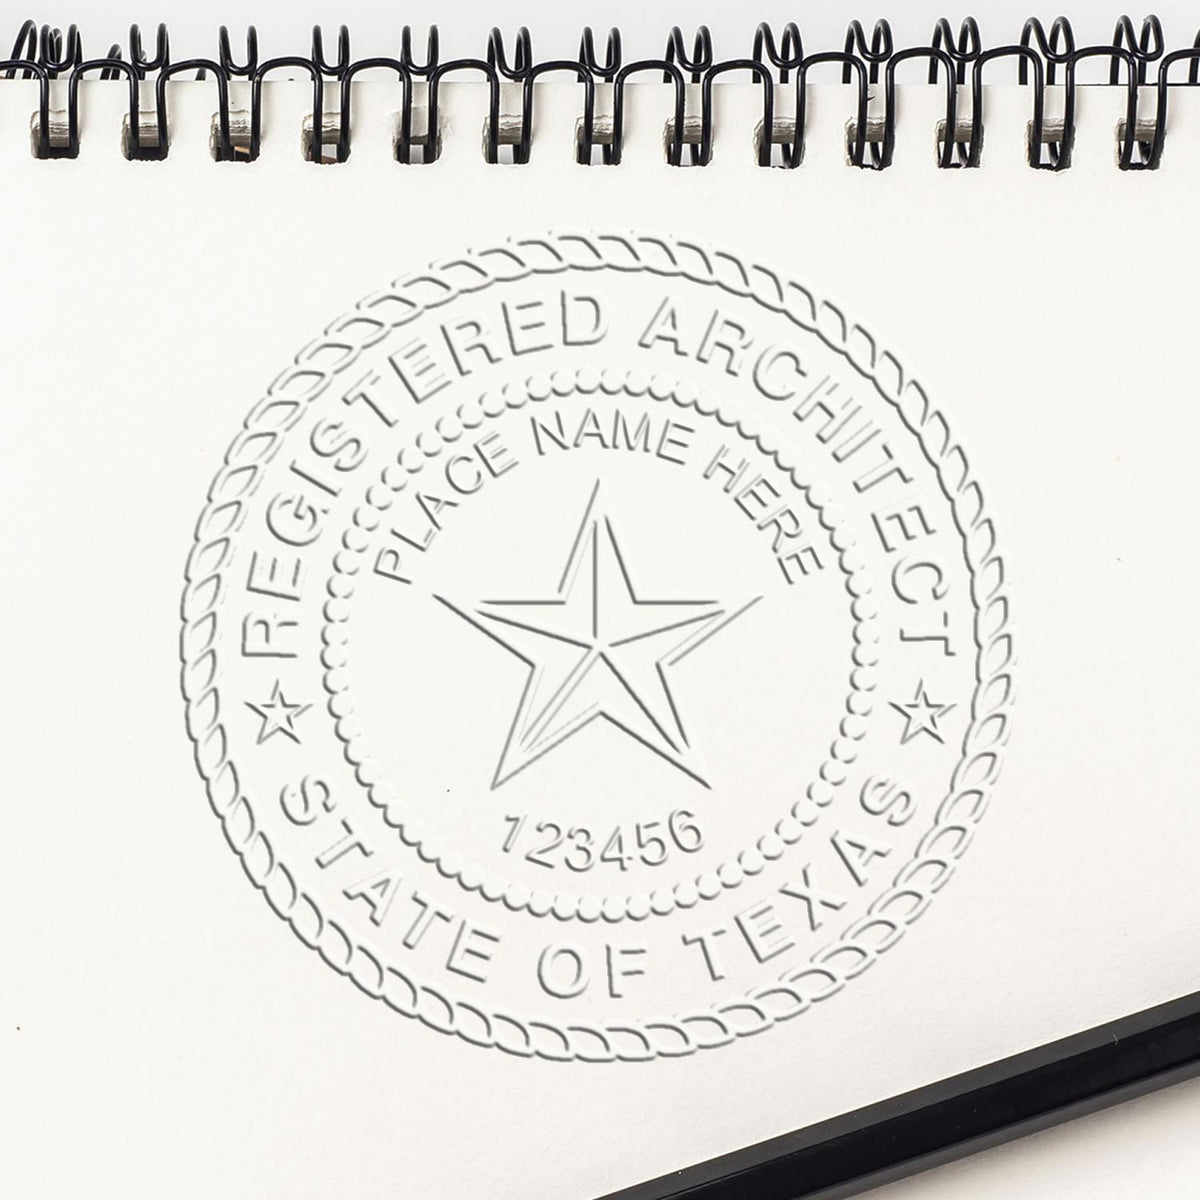 Another Example of a stamped impression of the Heavy Duty Cast Iron Texas Architect Embosser on a piece of office paper.